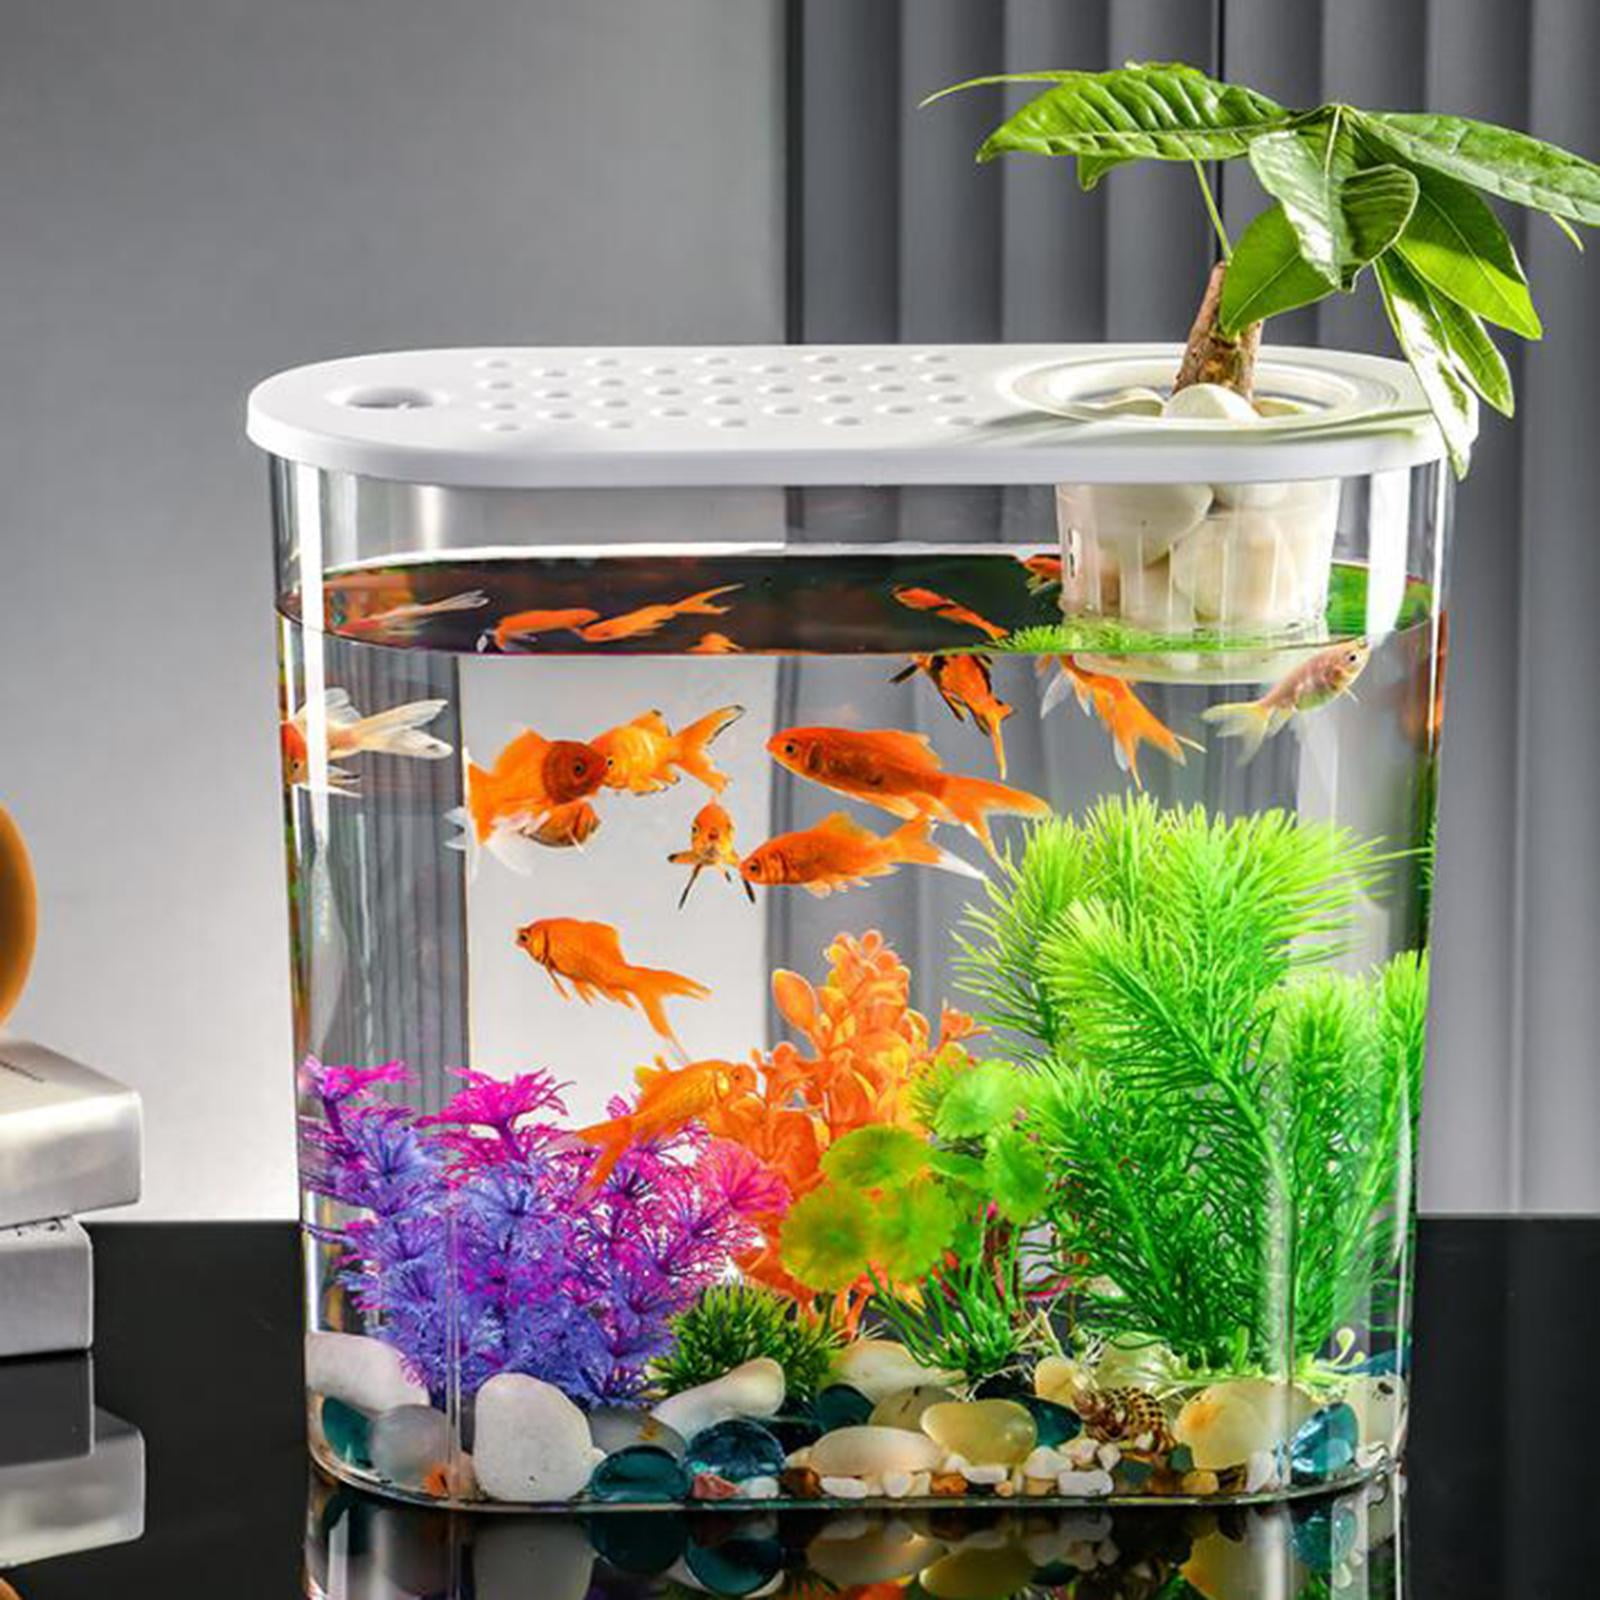 Small Fish Tank Clear Fish Breeding Box Goldfish Aquarium Tank for Goldfish， Fish and Plants Growing System Tank for Home Living Room Garden Desktop  With Hydroponics 